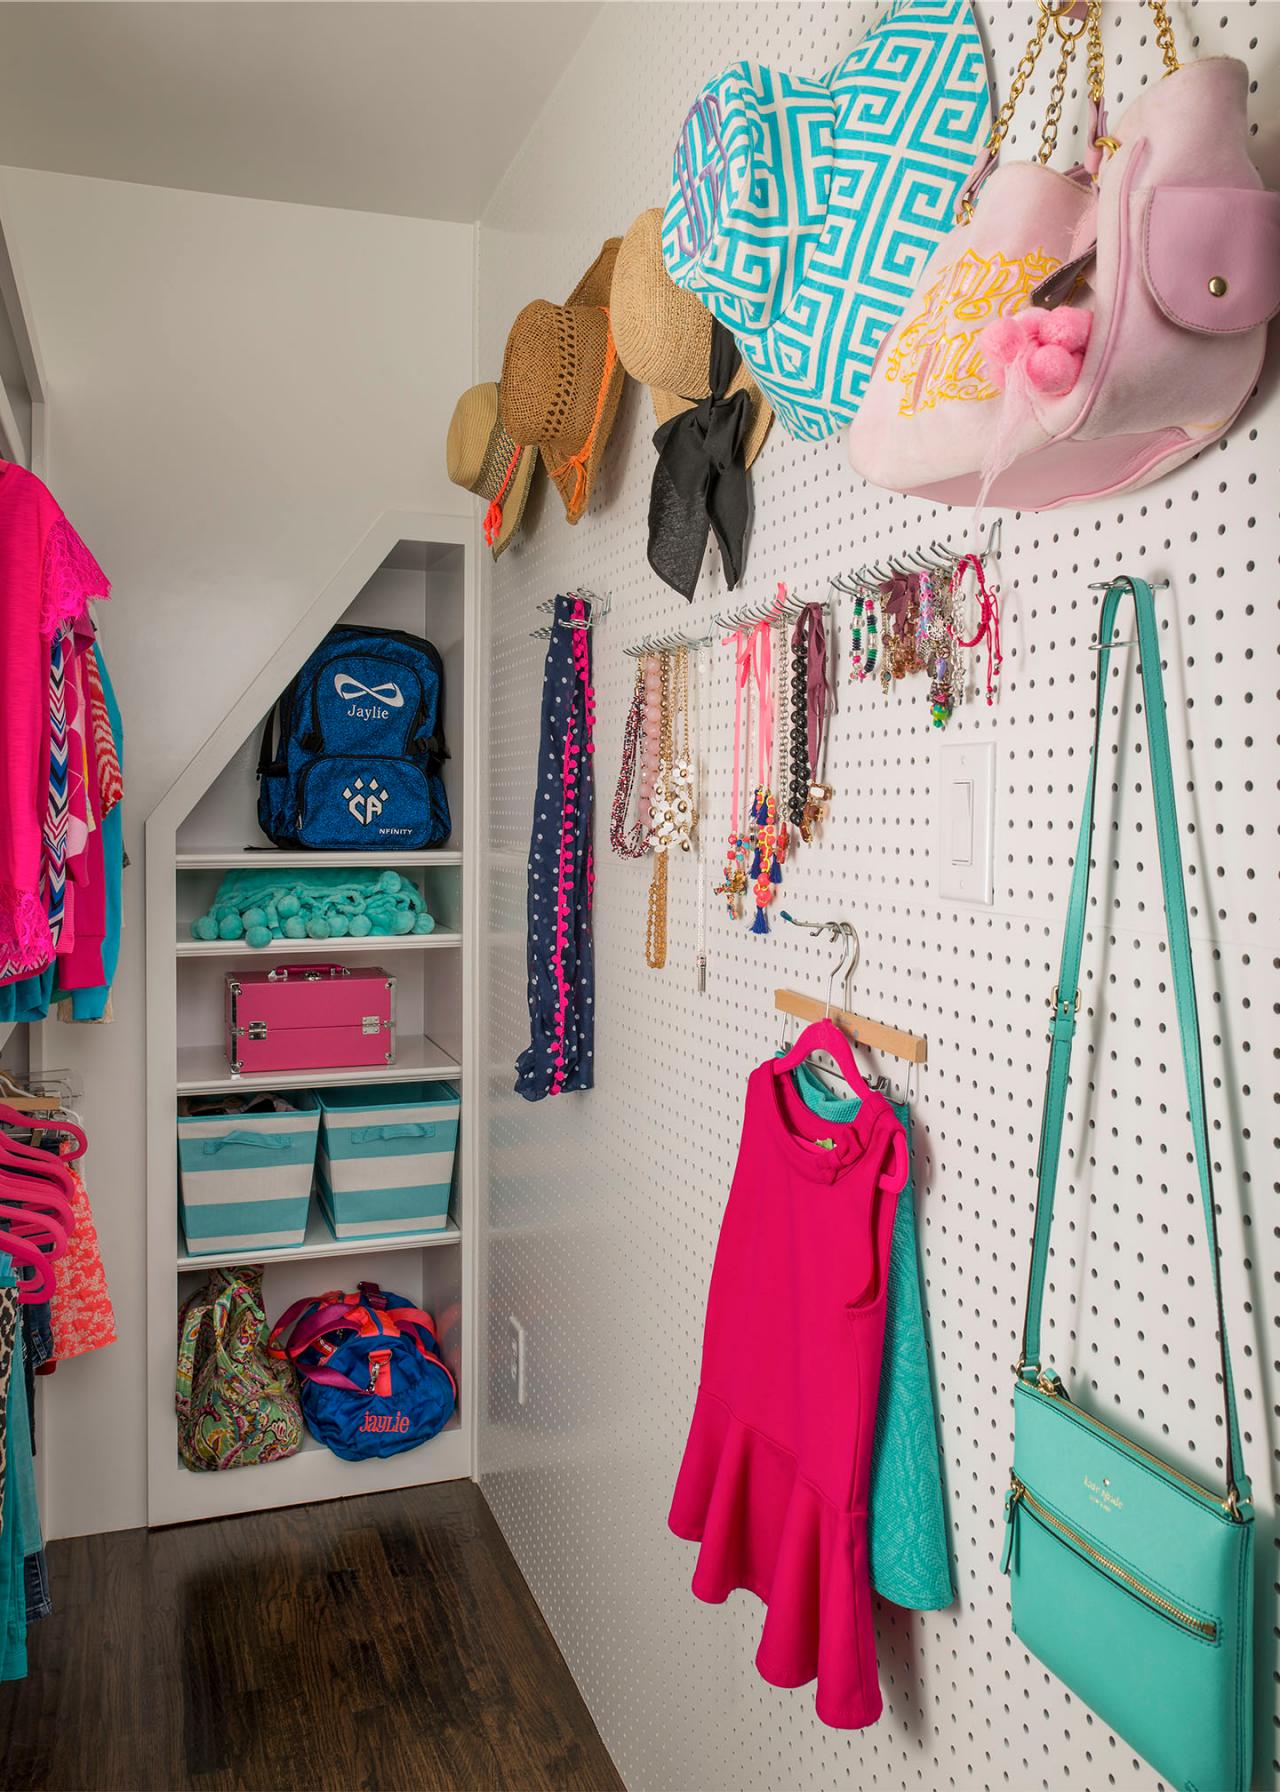 21 Creative Pegboard Ideas For Your Entire House Hgtv S Decorating Design Blog Hgtv